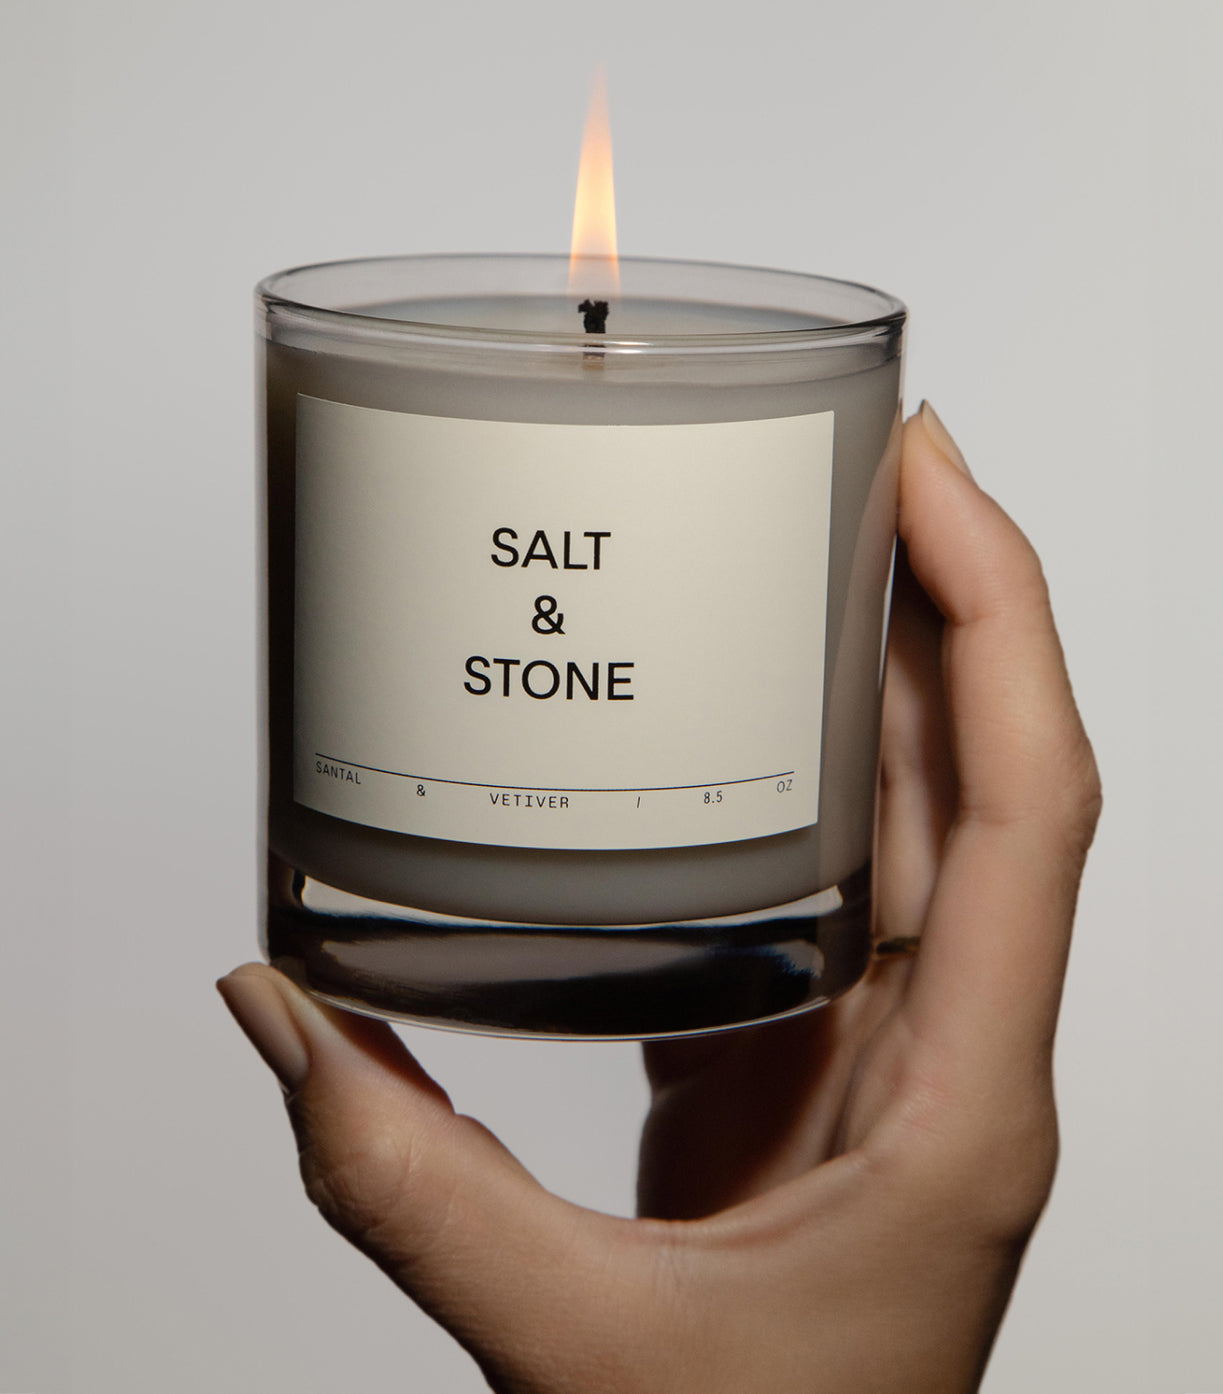 SALT AND STONE CANDLE - SANTAL & VETIVER